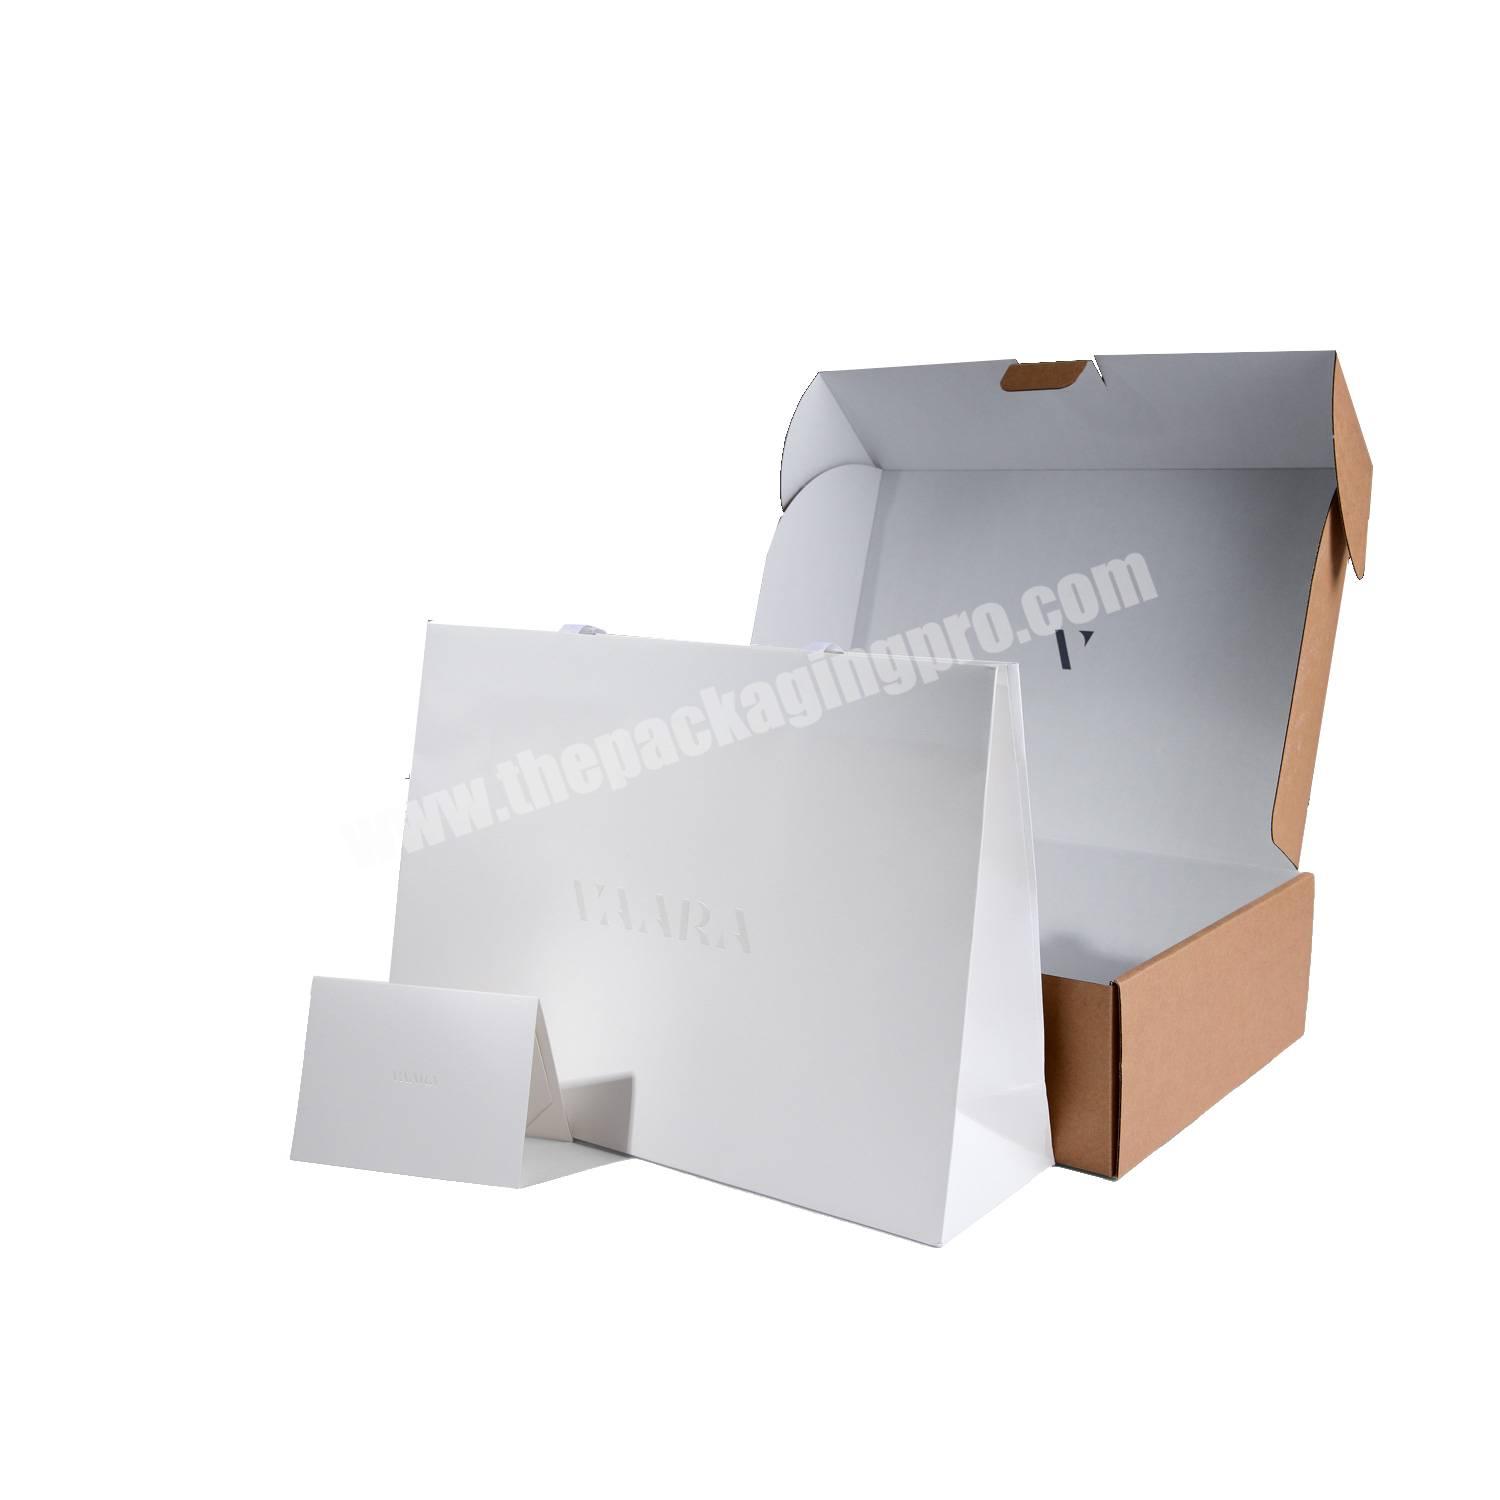 New Arrival Fo Simple Elegant Folding Product Packaging Design For Luxury Gift Paper Bag Tube Package Box Customized Design